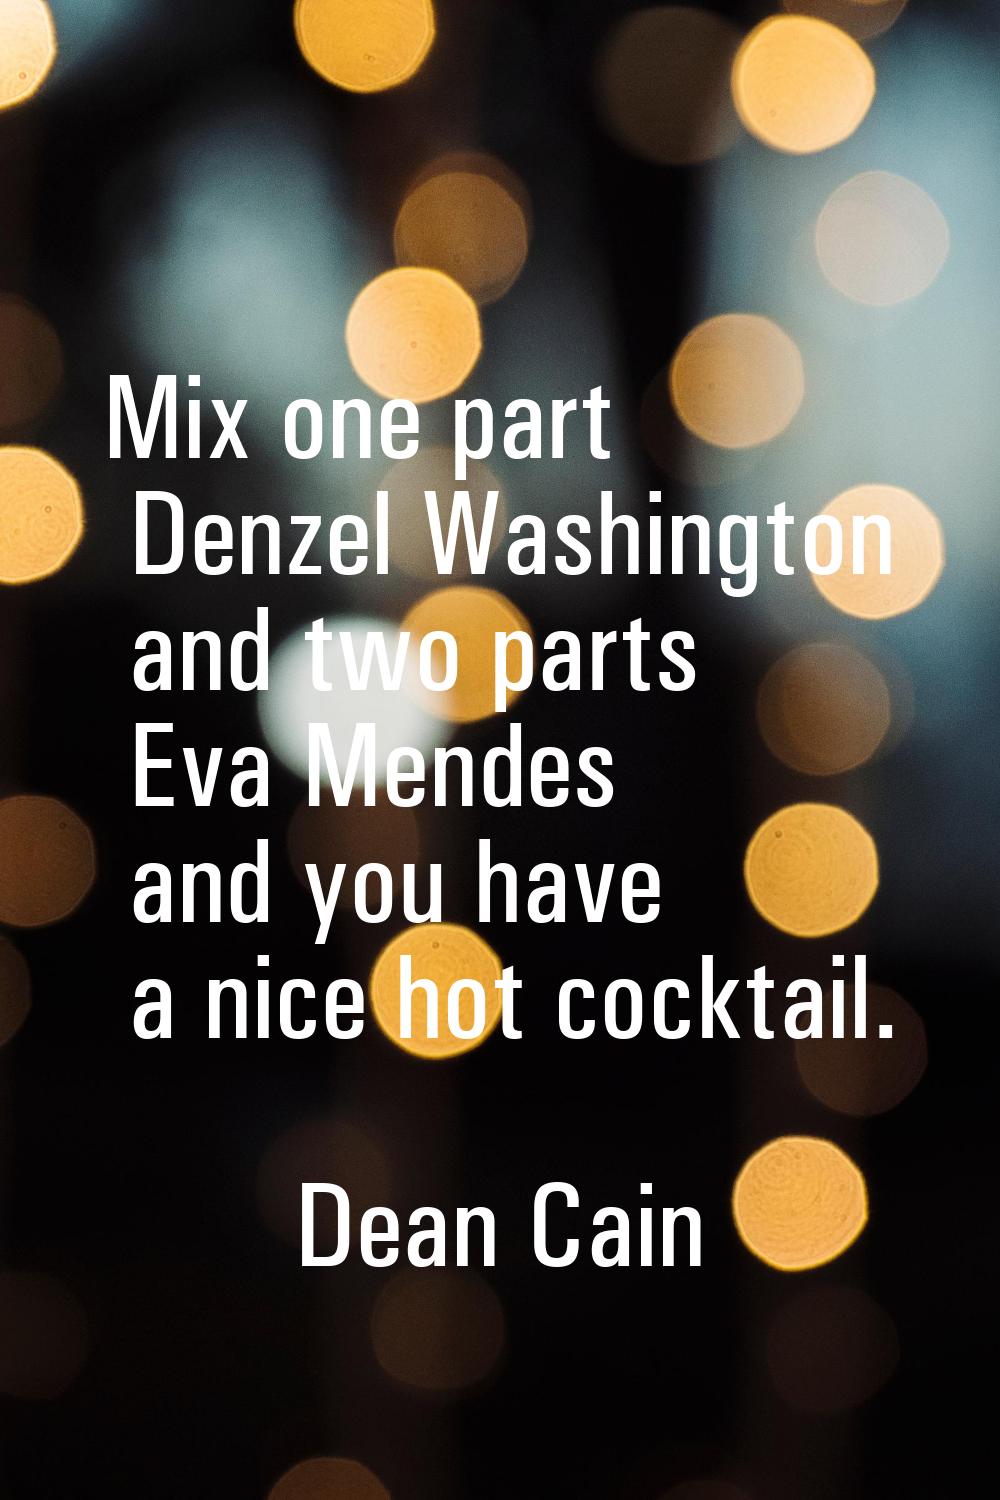 Mix one part Denzel Washington and two parts Eva Mendes and you have a nice hot cocktail.